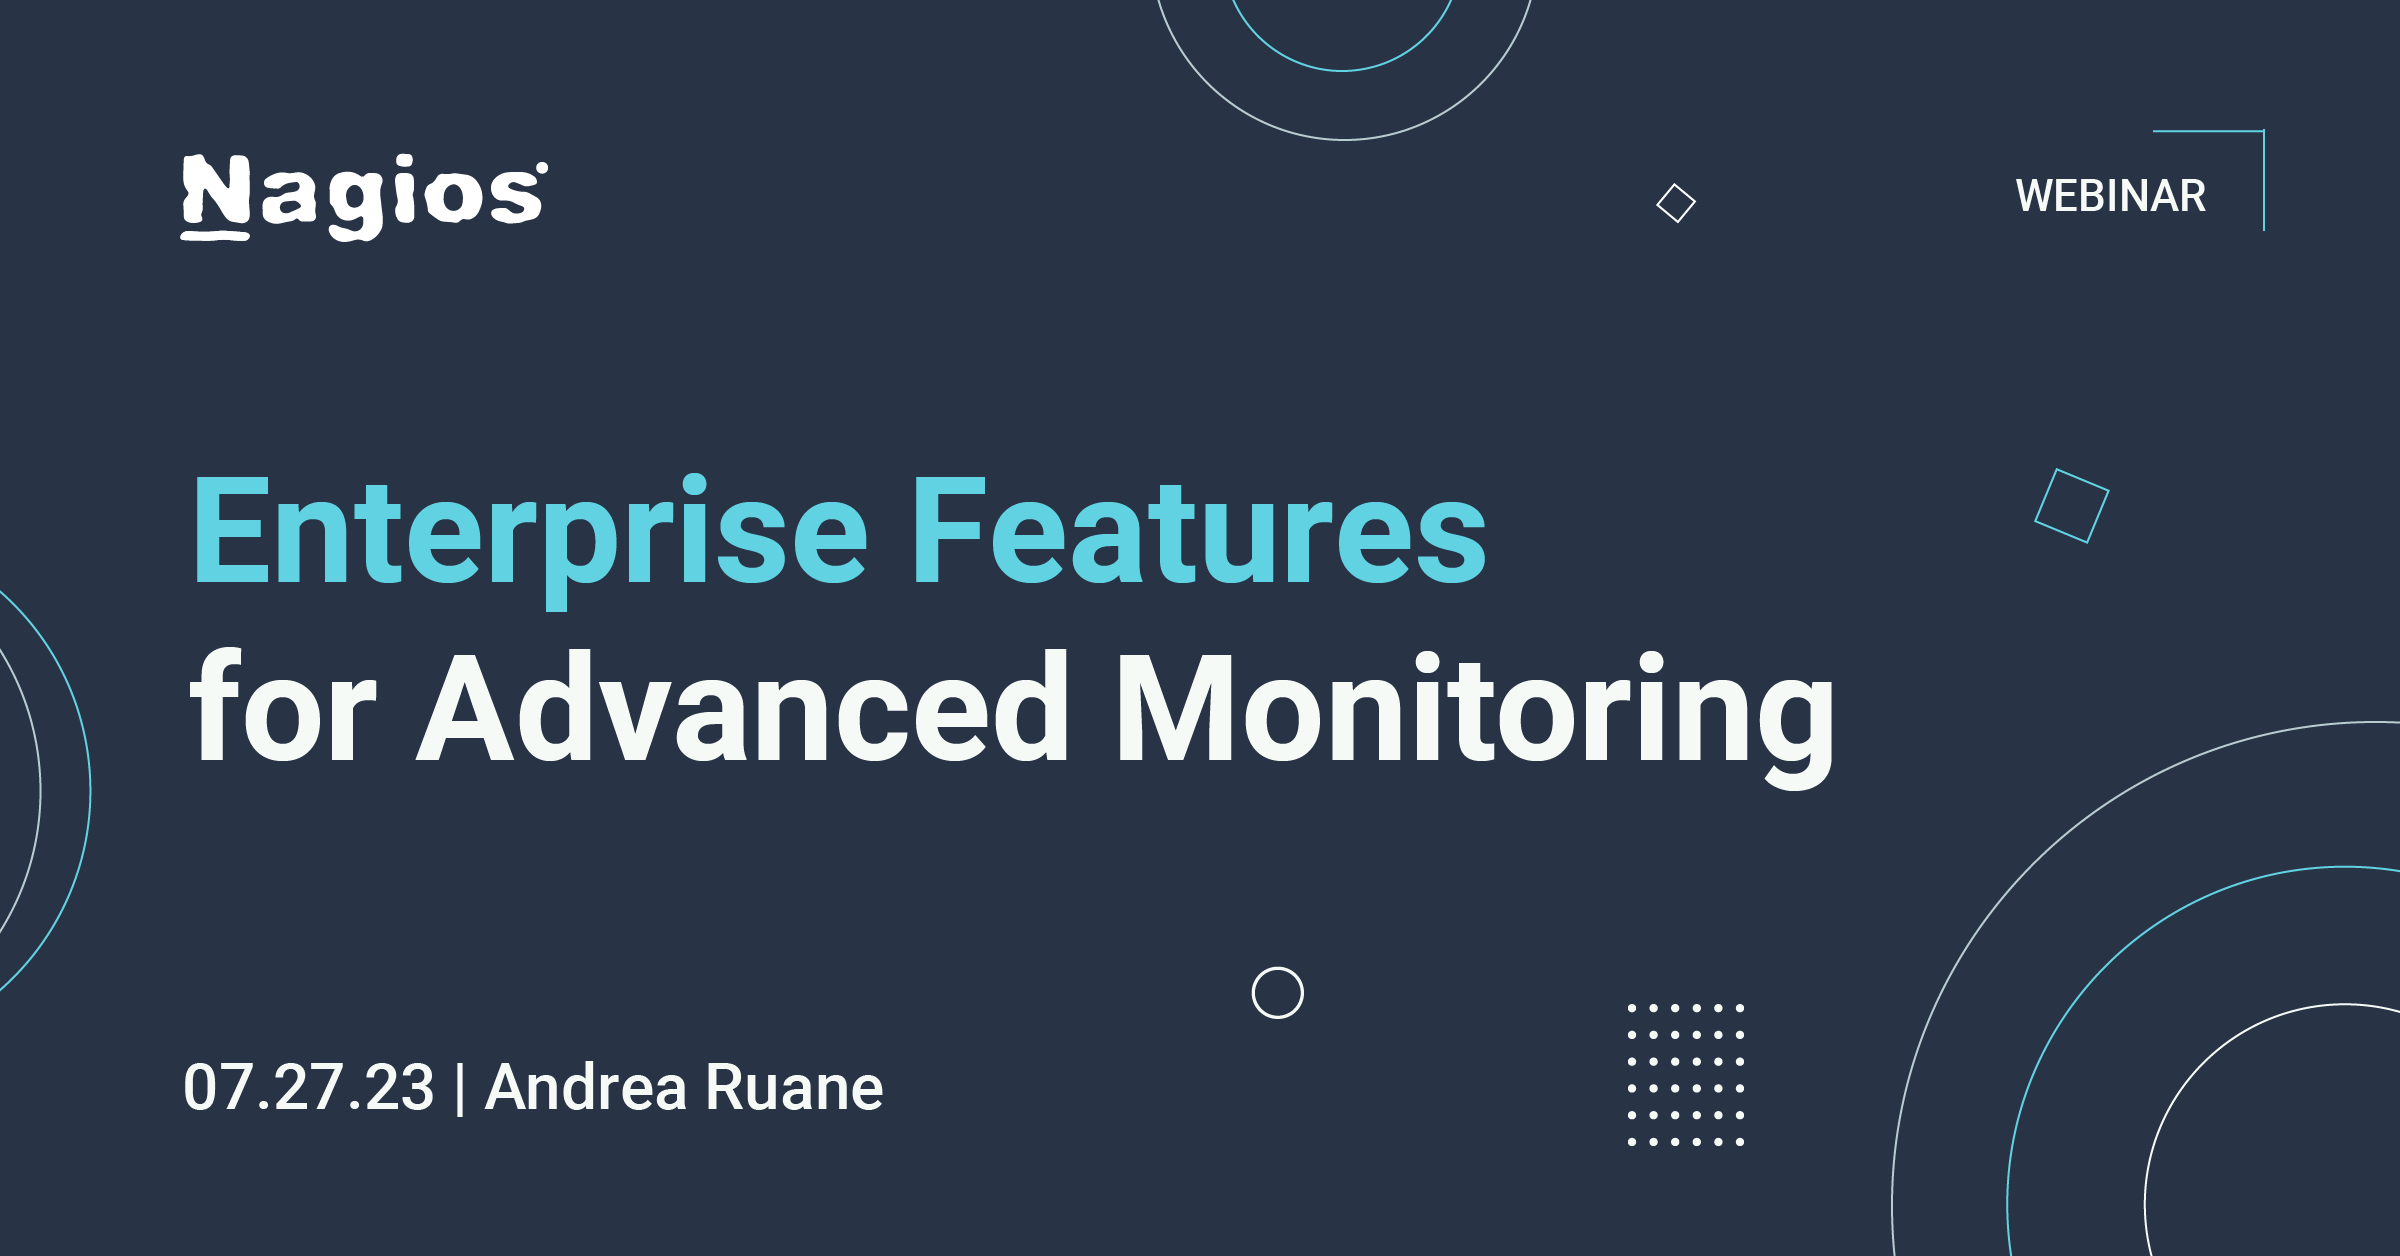 Enterprise Features for Advanced Monitoring@2x